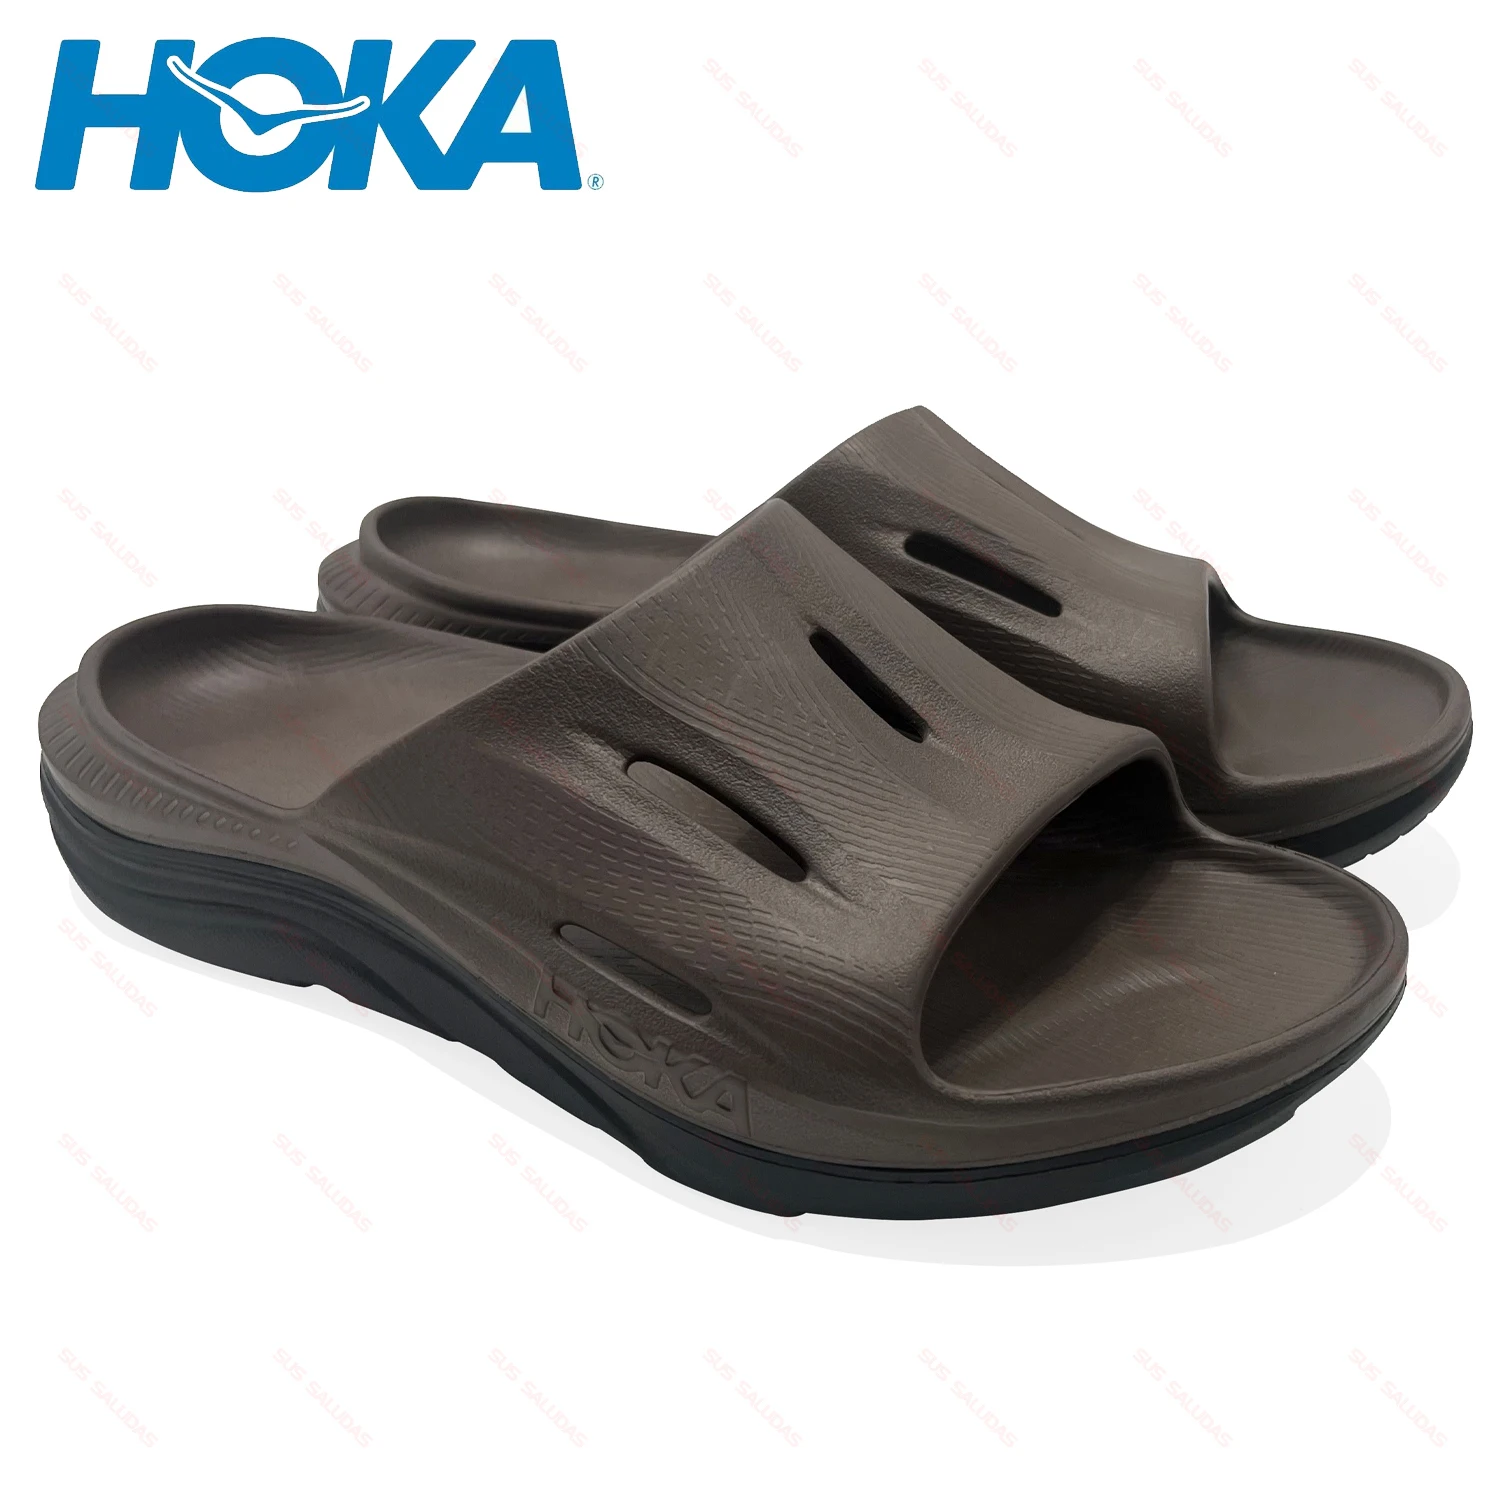 

HOKA ONE ONE Ora Slide 3 Slippers Men Recovery Sandals Comfortable Plantar Fasciitis Arch Support Orthotic Open Toe Sport Slides